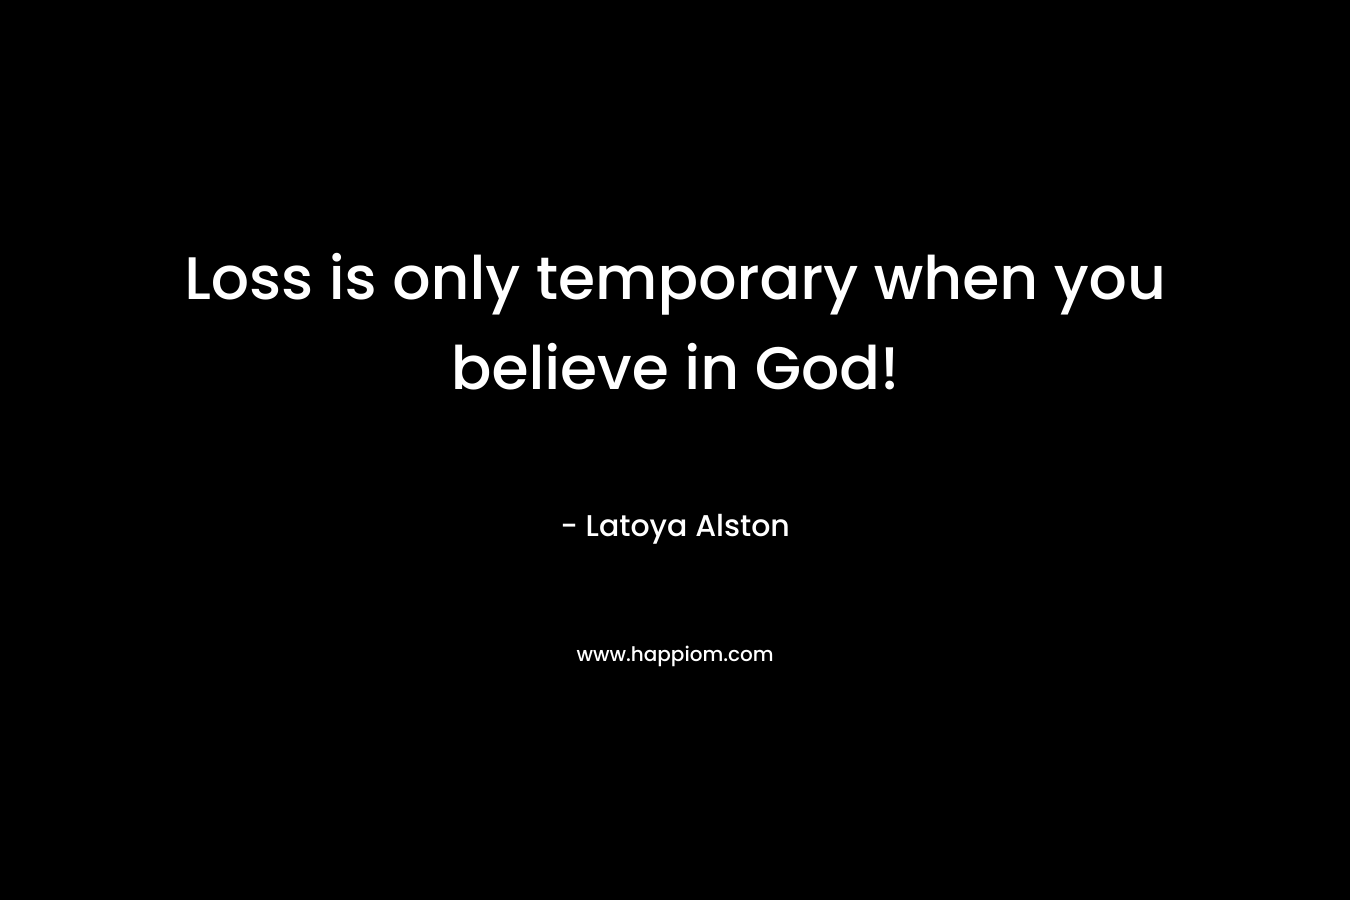 Loss is only temporary when you believe in God! – Latoya Alston